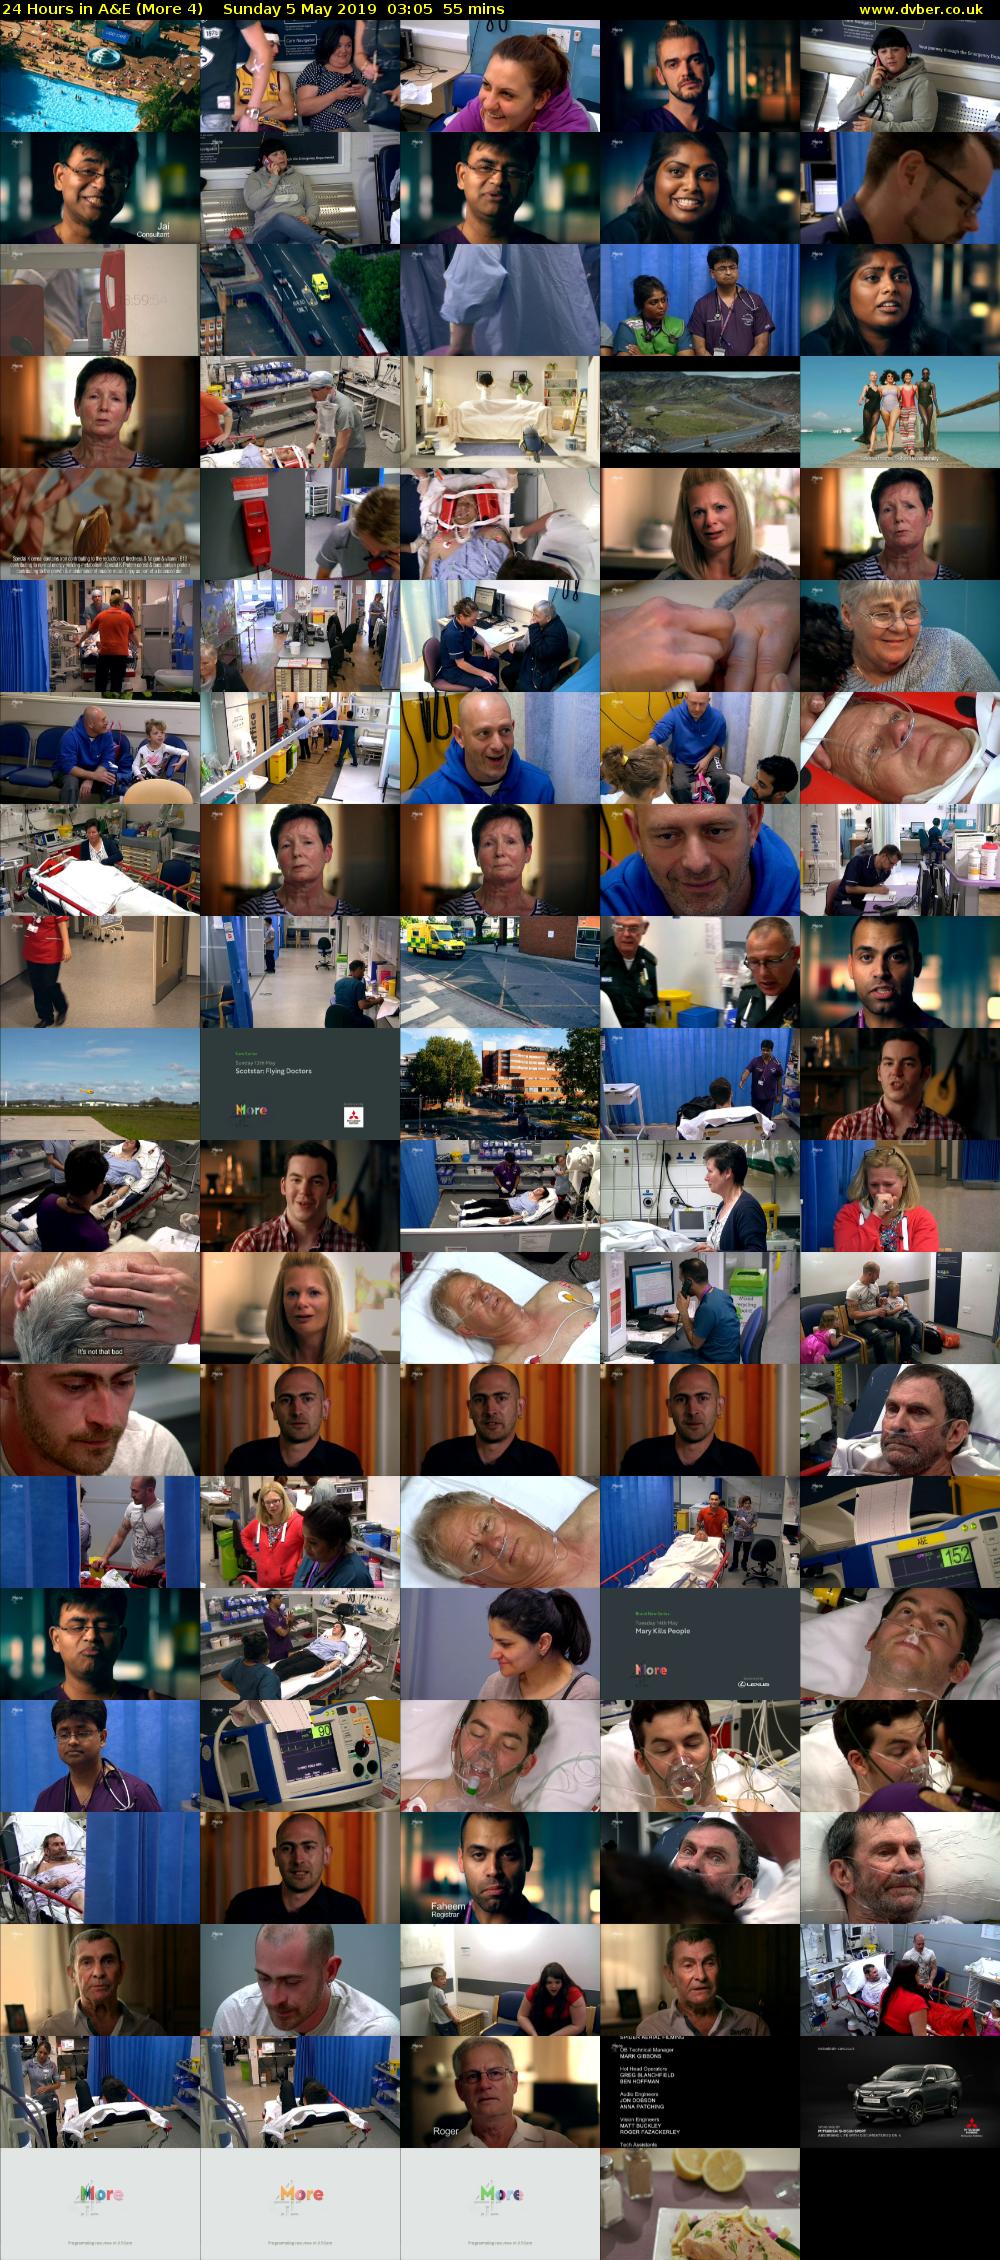 24 Hours in A&E (More 4) Sunday 5 May 2019 03:05 - 04:00